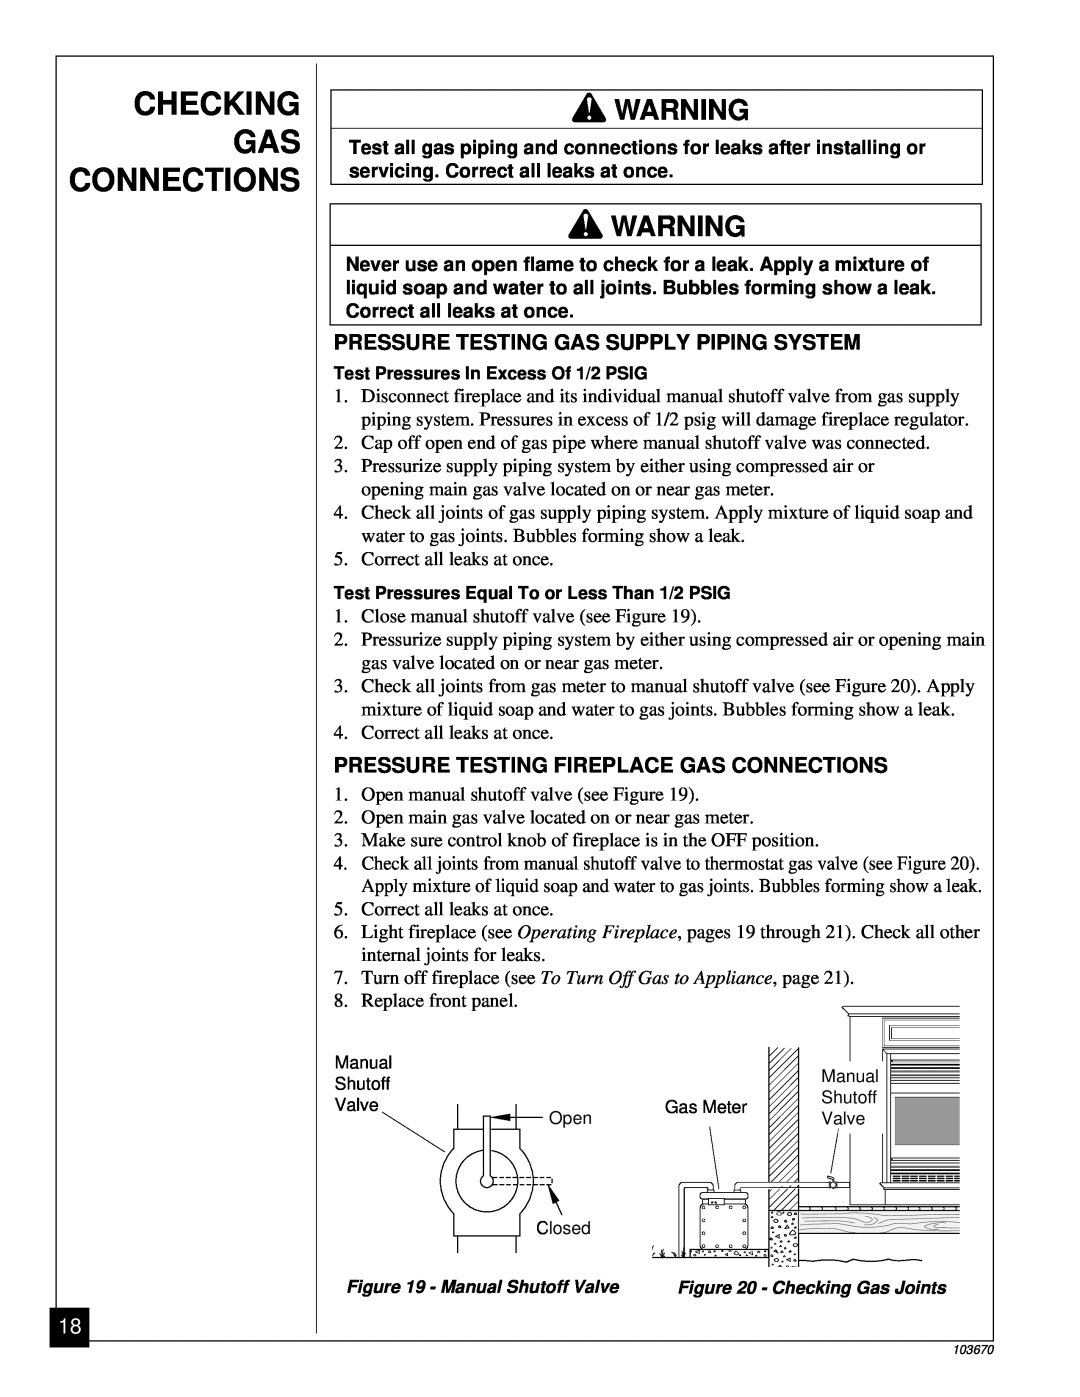 Vanguard Heating VMH10TN installation manual Checking, Connections, Pressure Testing Gas Supply Piping System 